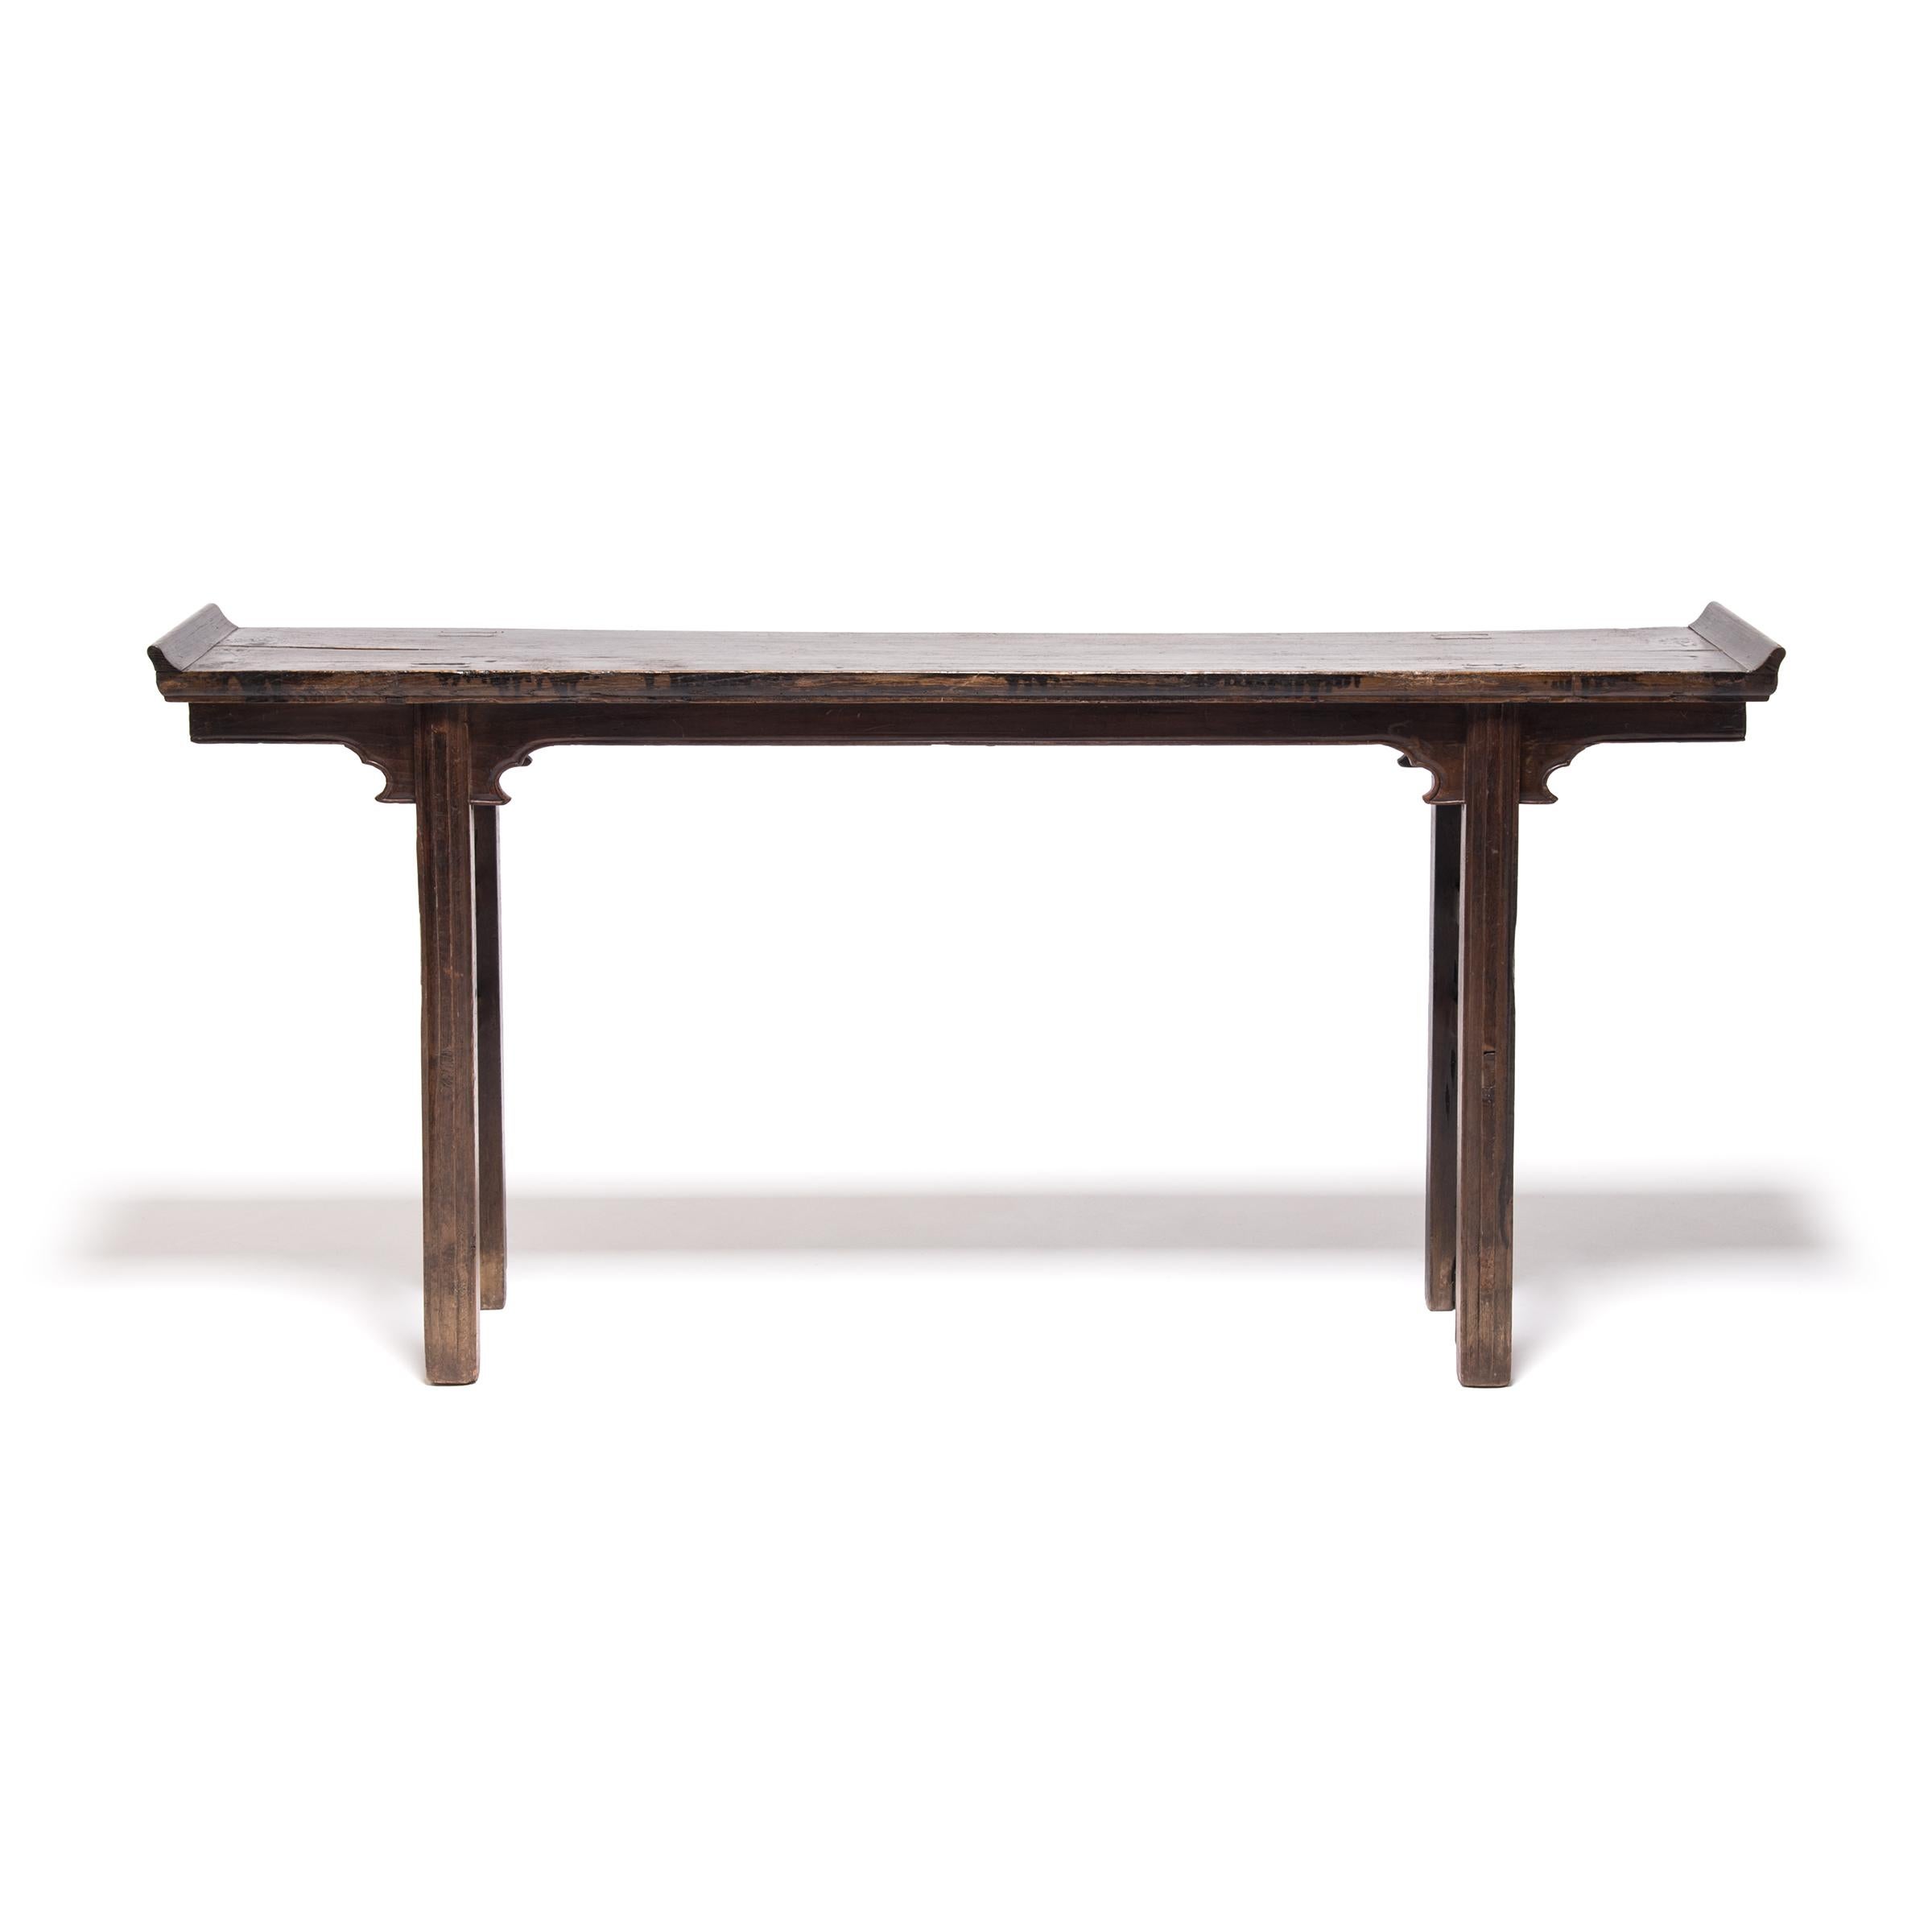 A century and a half ago this elm wood table probably sat in the home of a Qing Dynasty family, used as their ancestral altar. The clean lines would have complimented the Classic Chinese architecture of the home, but the elegant simplicity makes